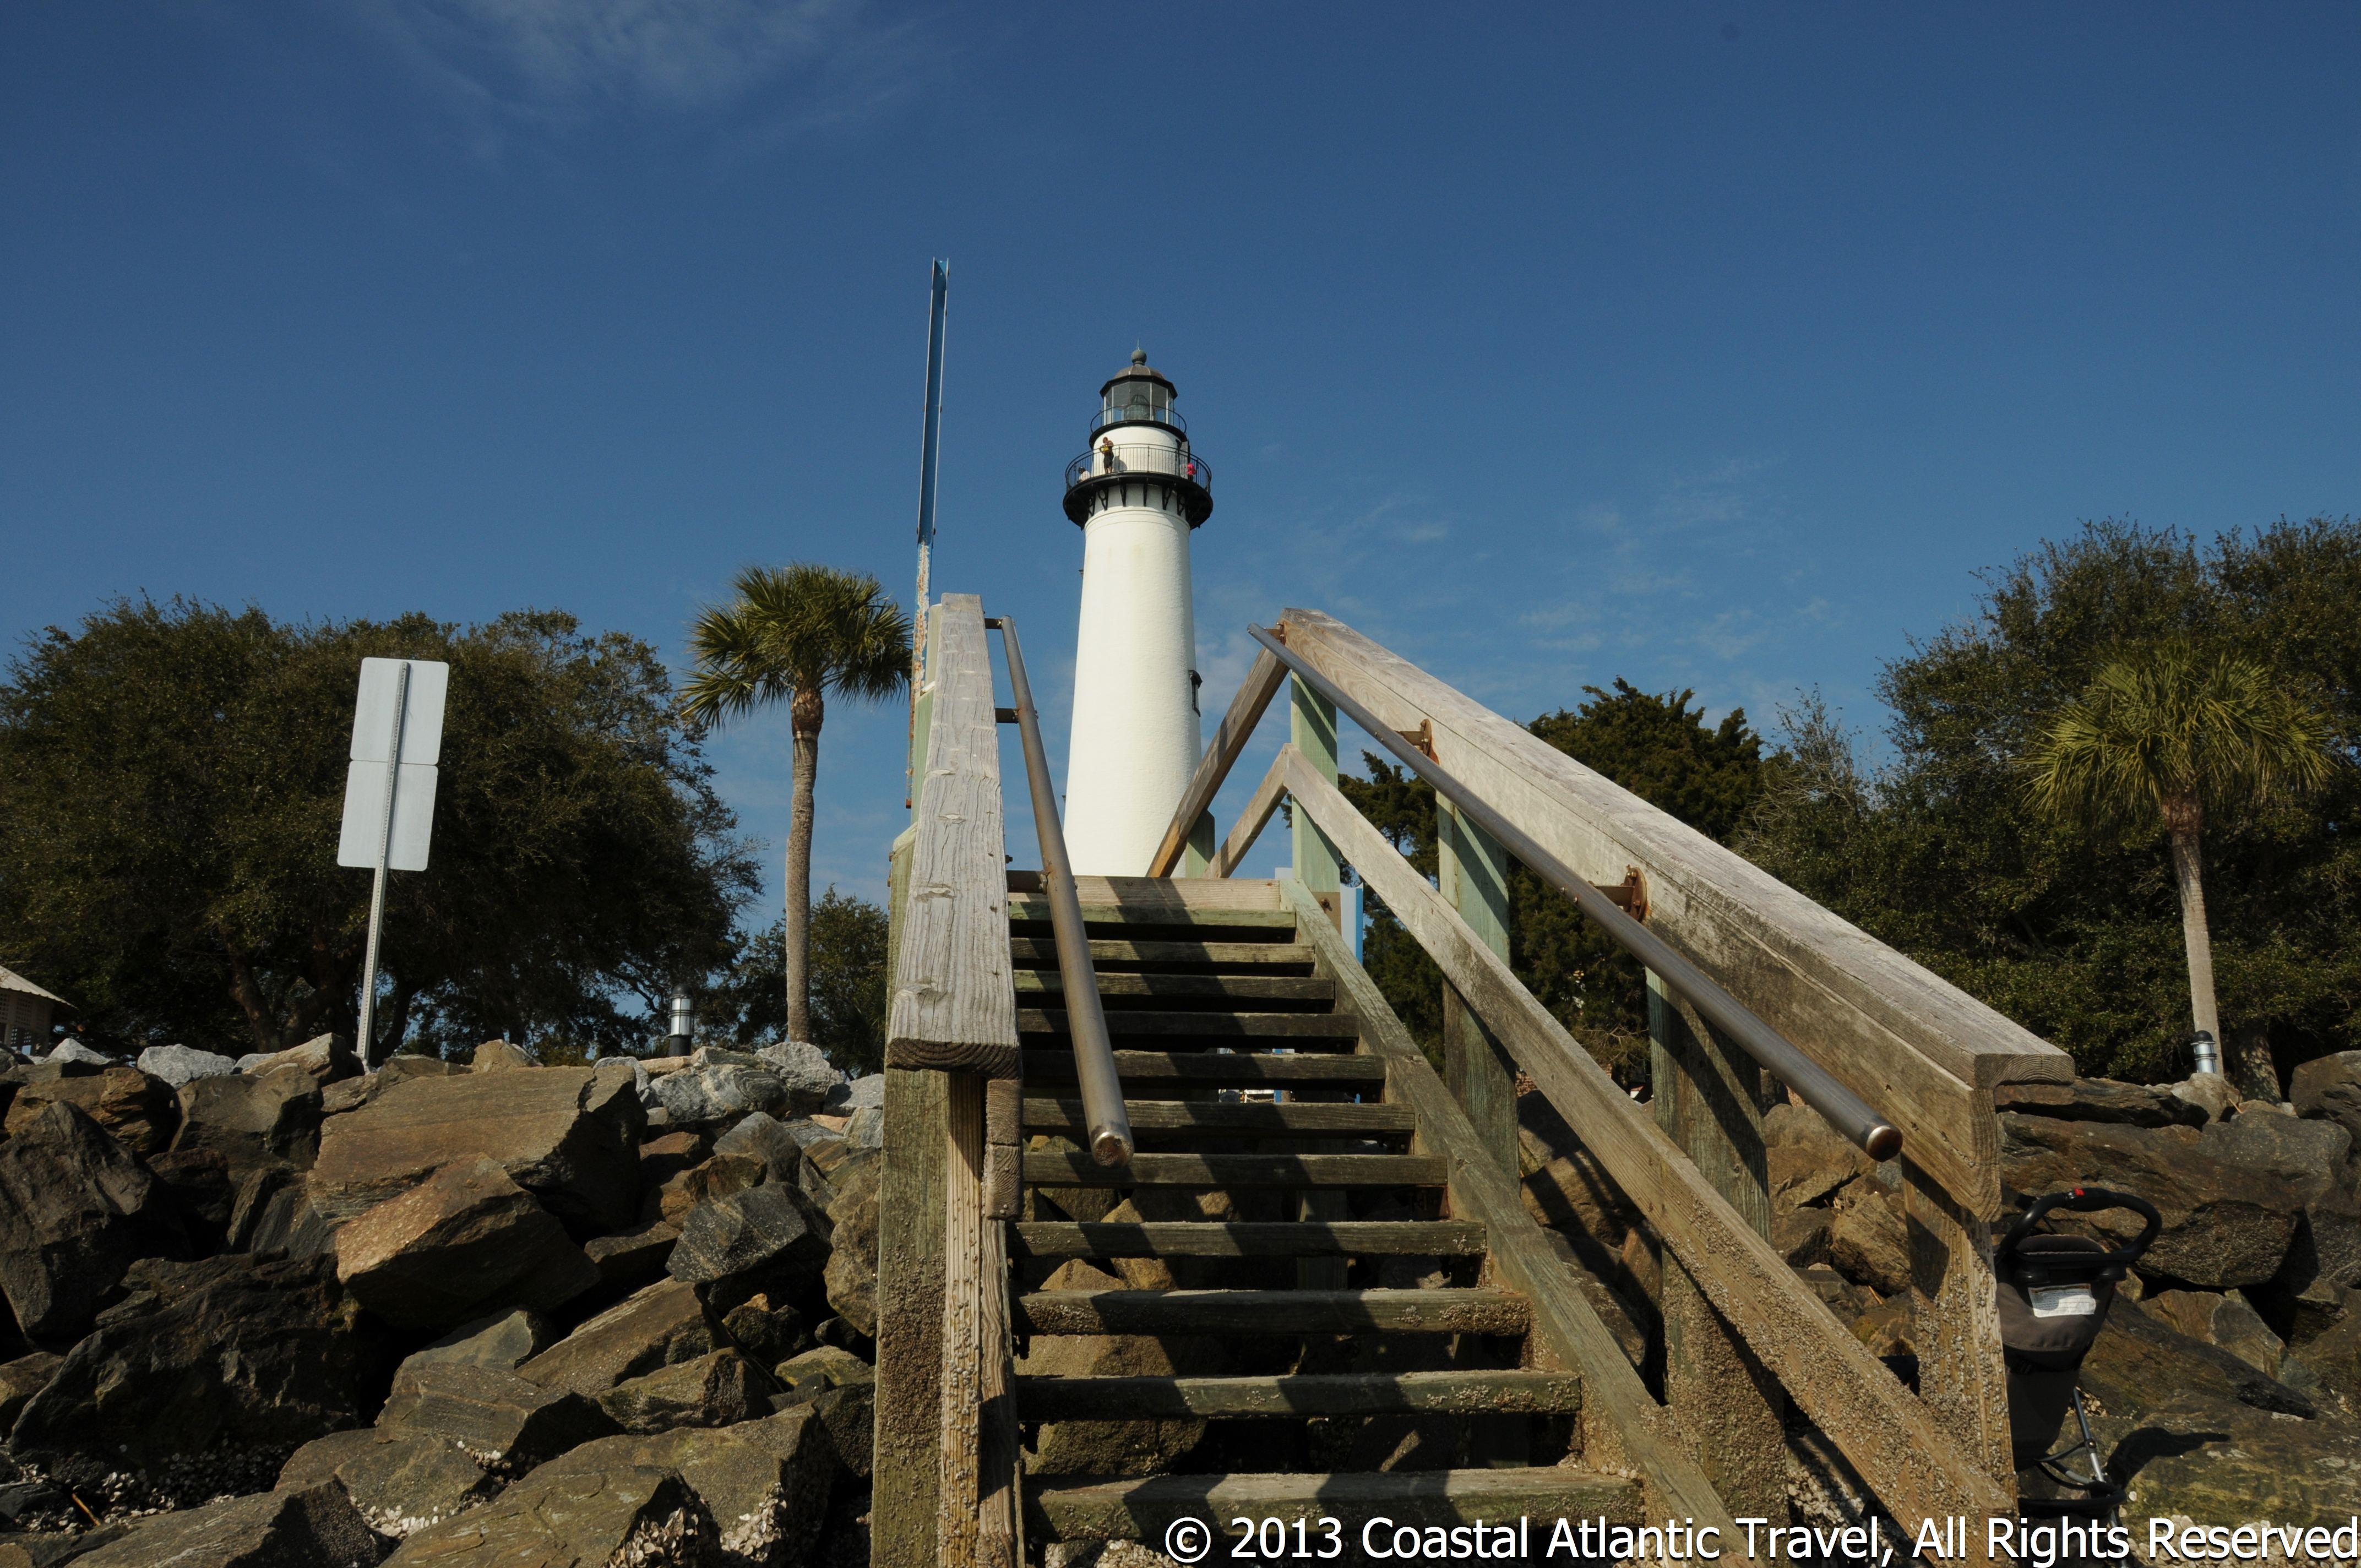 Stairs from St Simons Sound